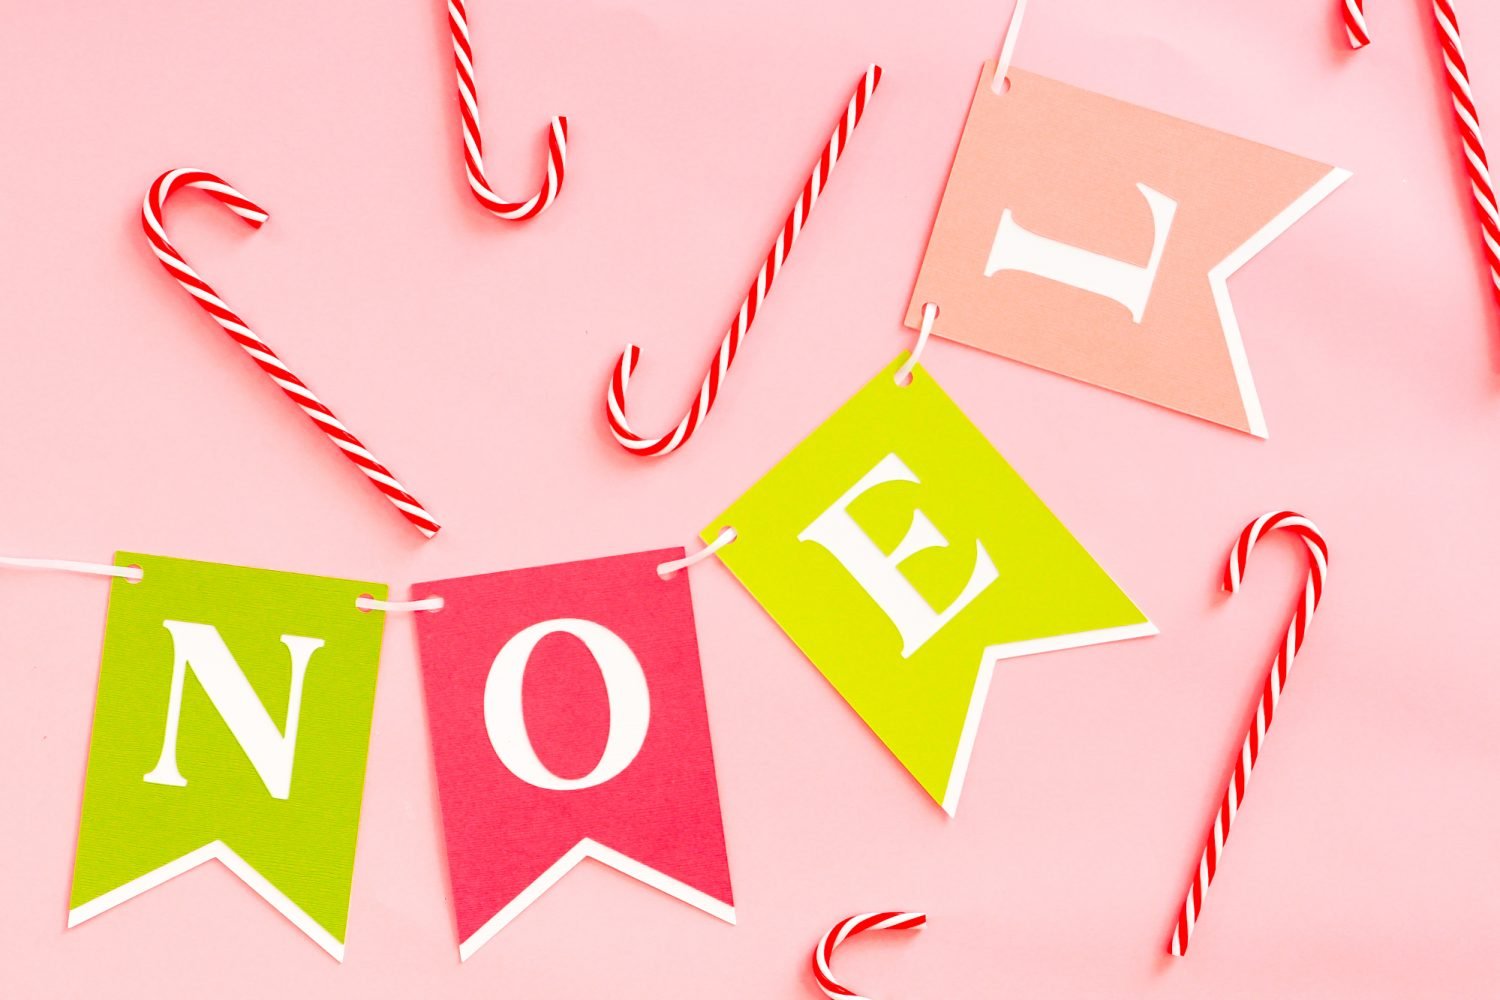 NOEL Banner on pink background with candy canes